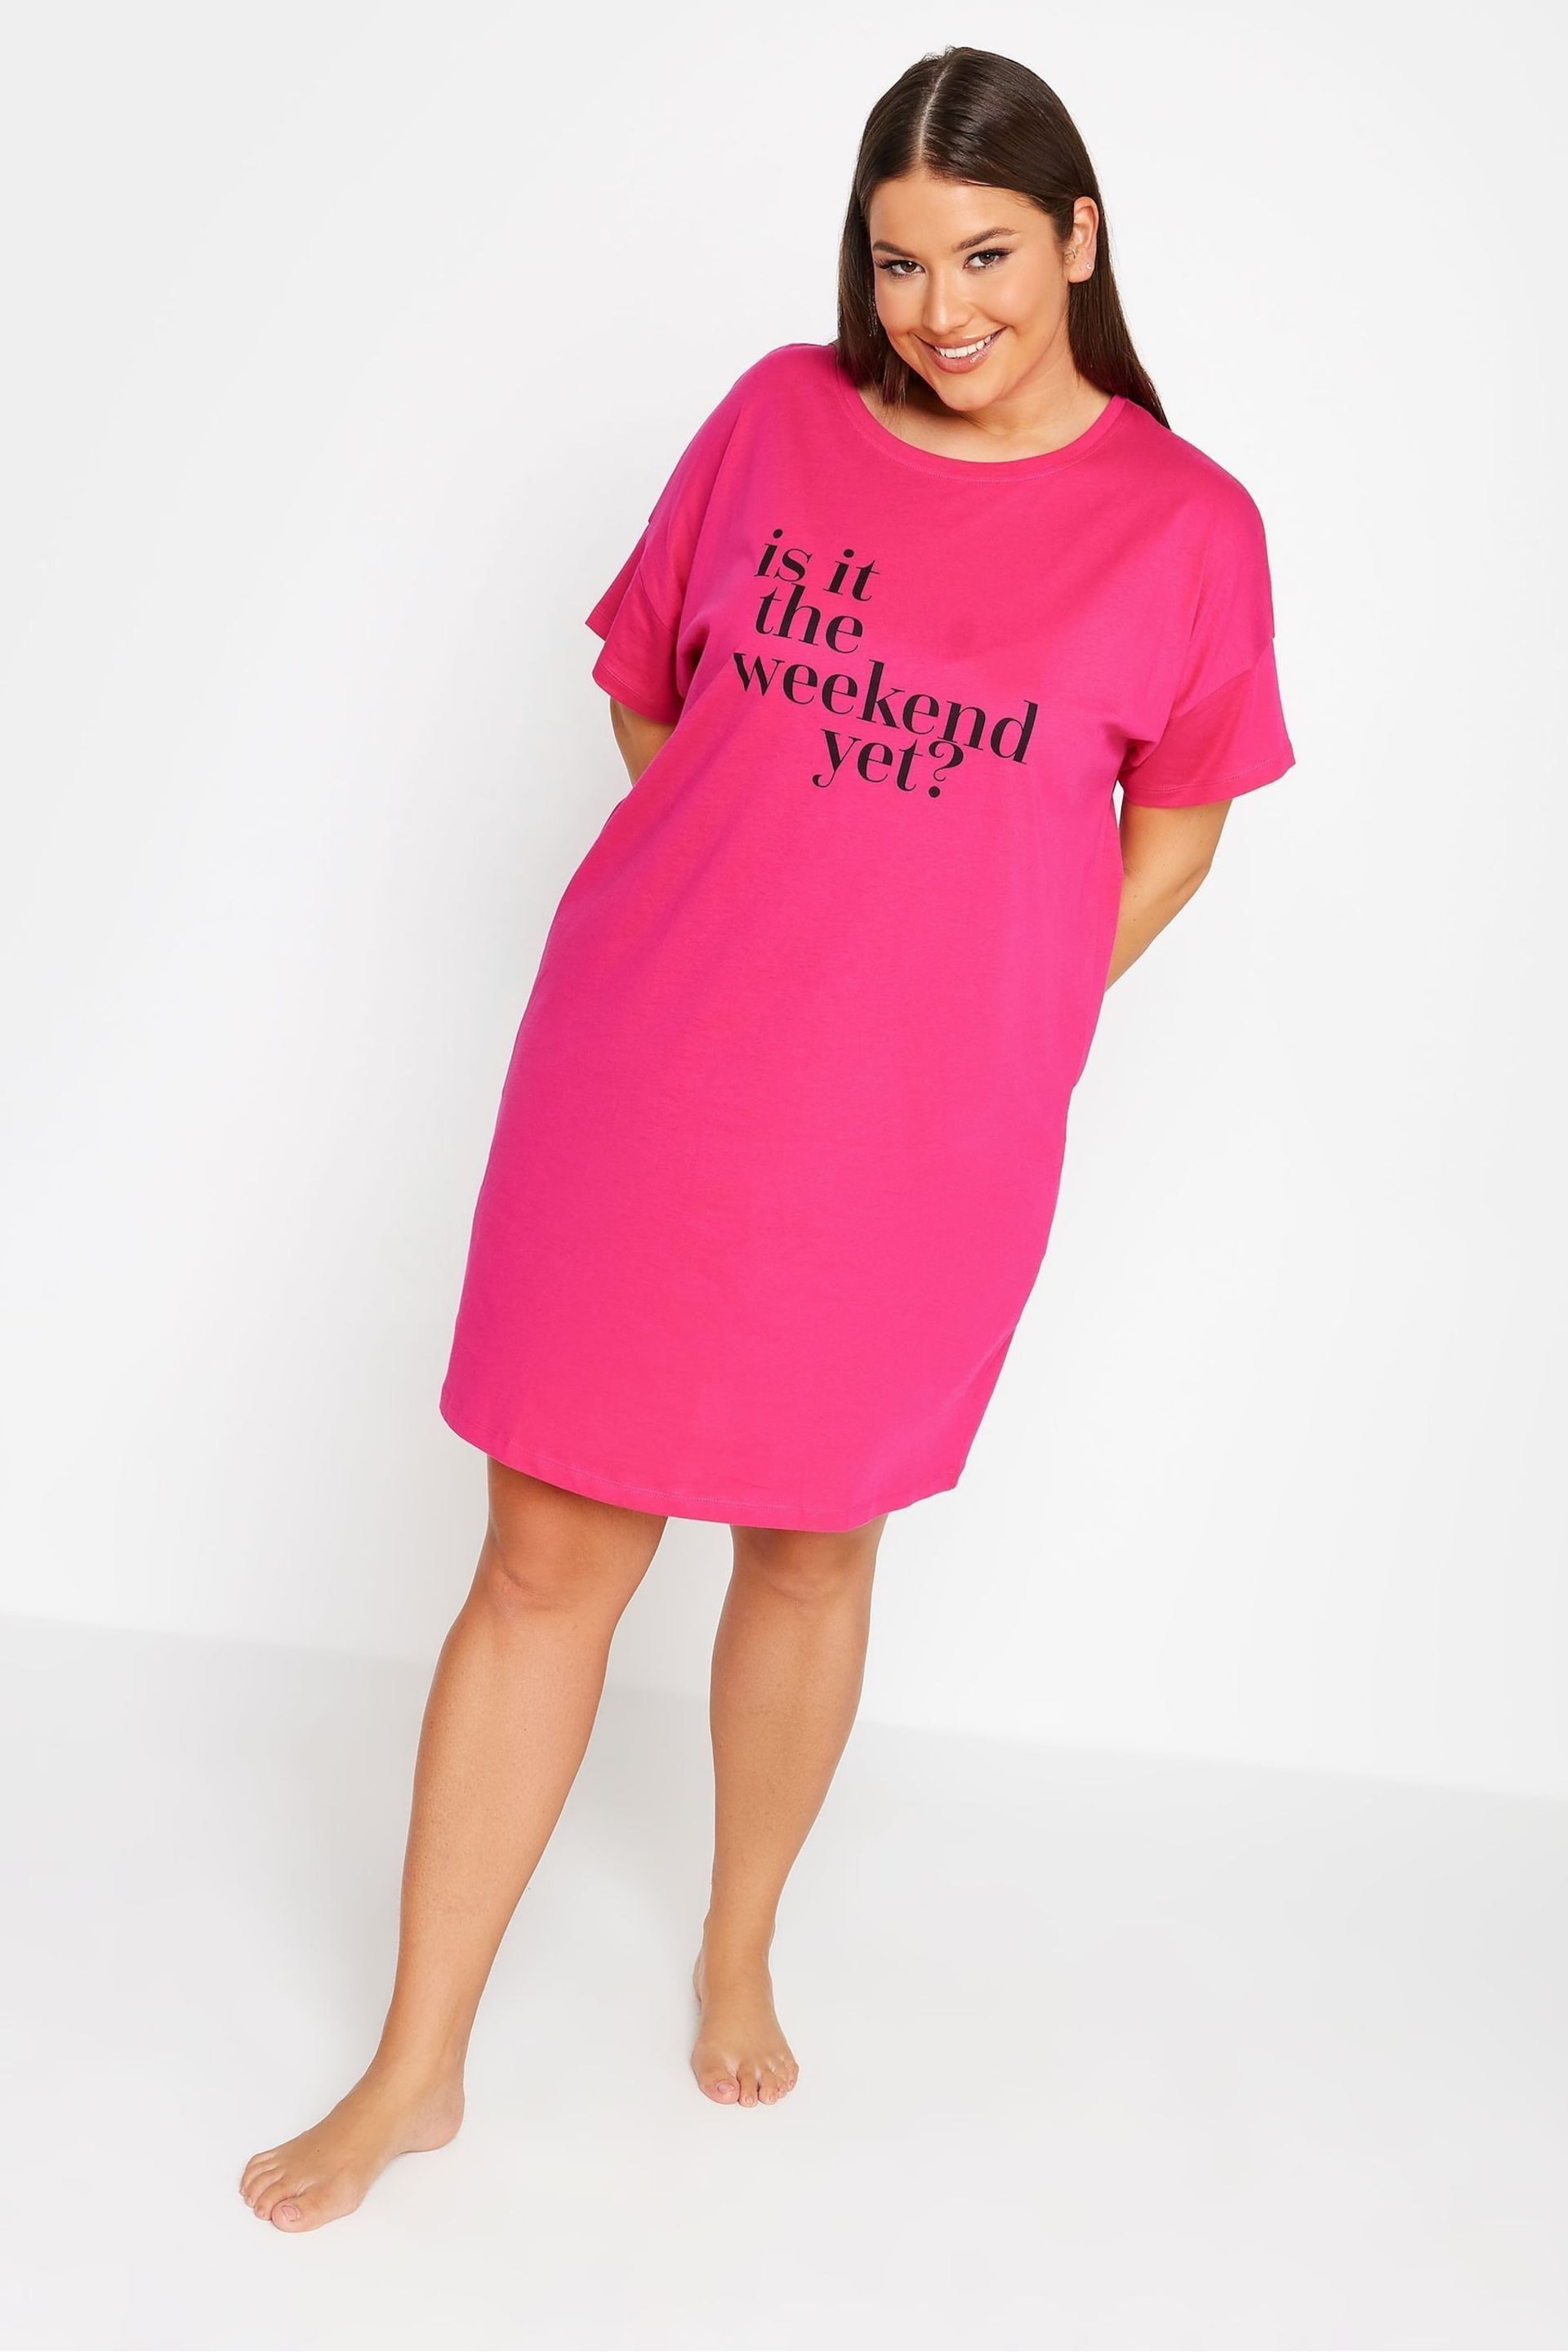 Yours Curve Pink Love Hearts Sleep T-Shirt - Image 3 of 4